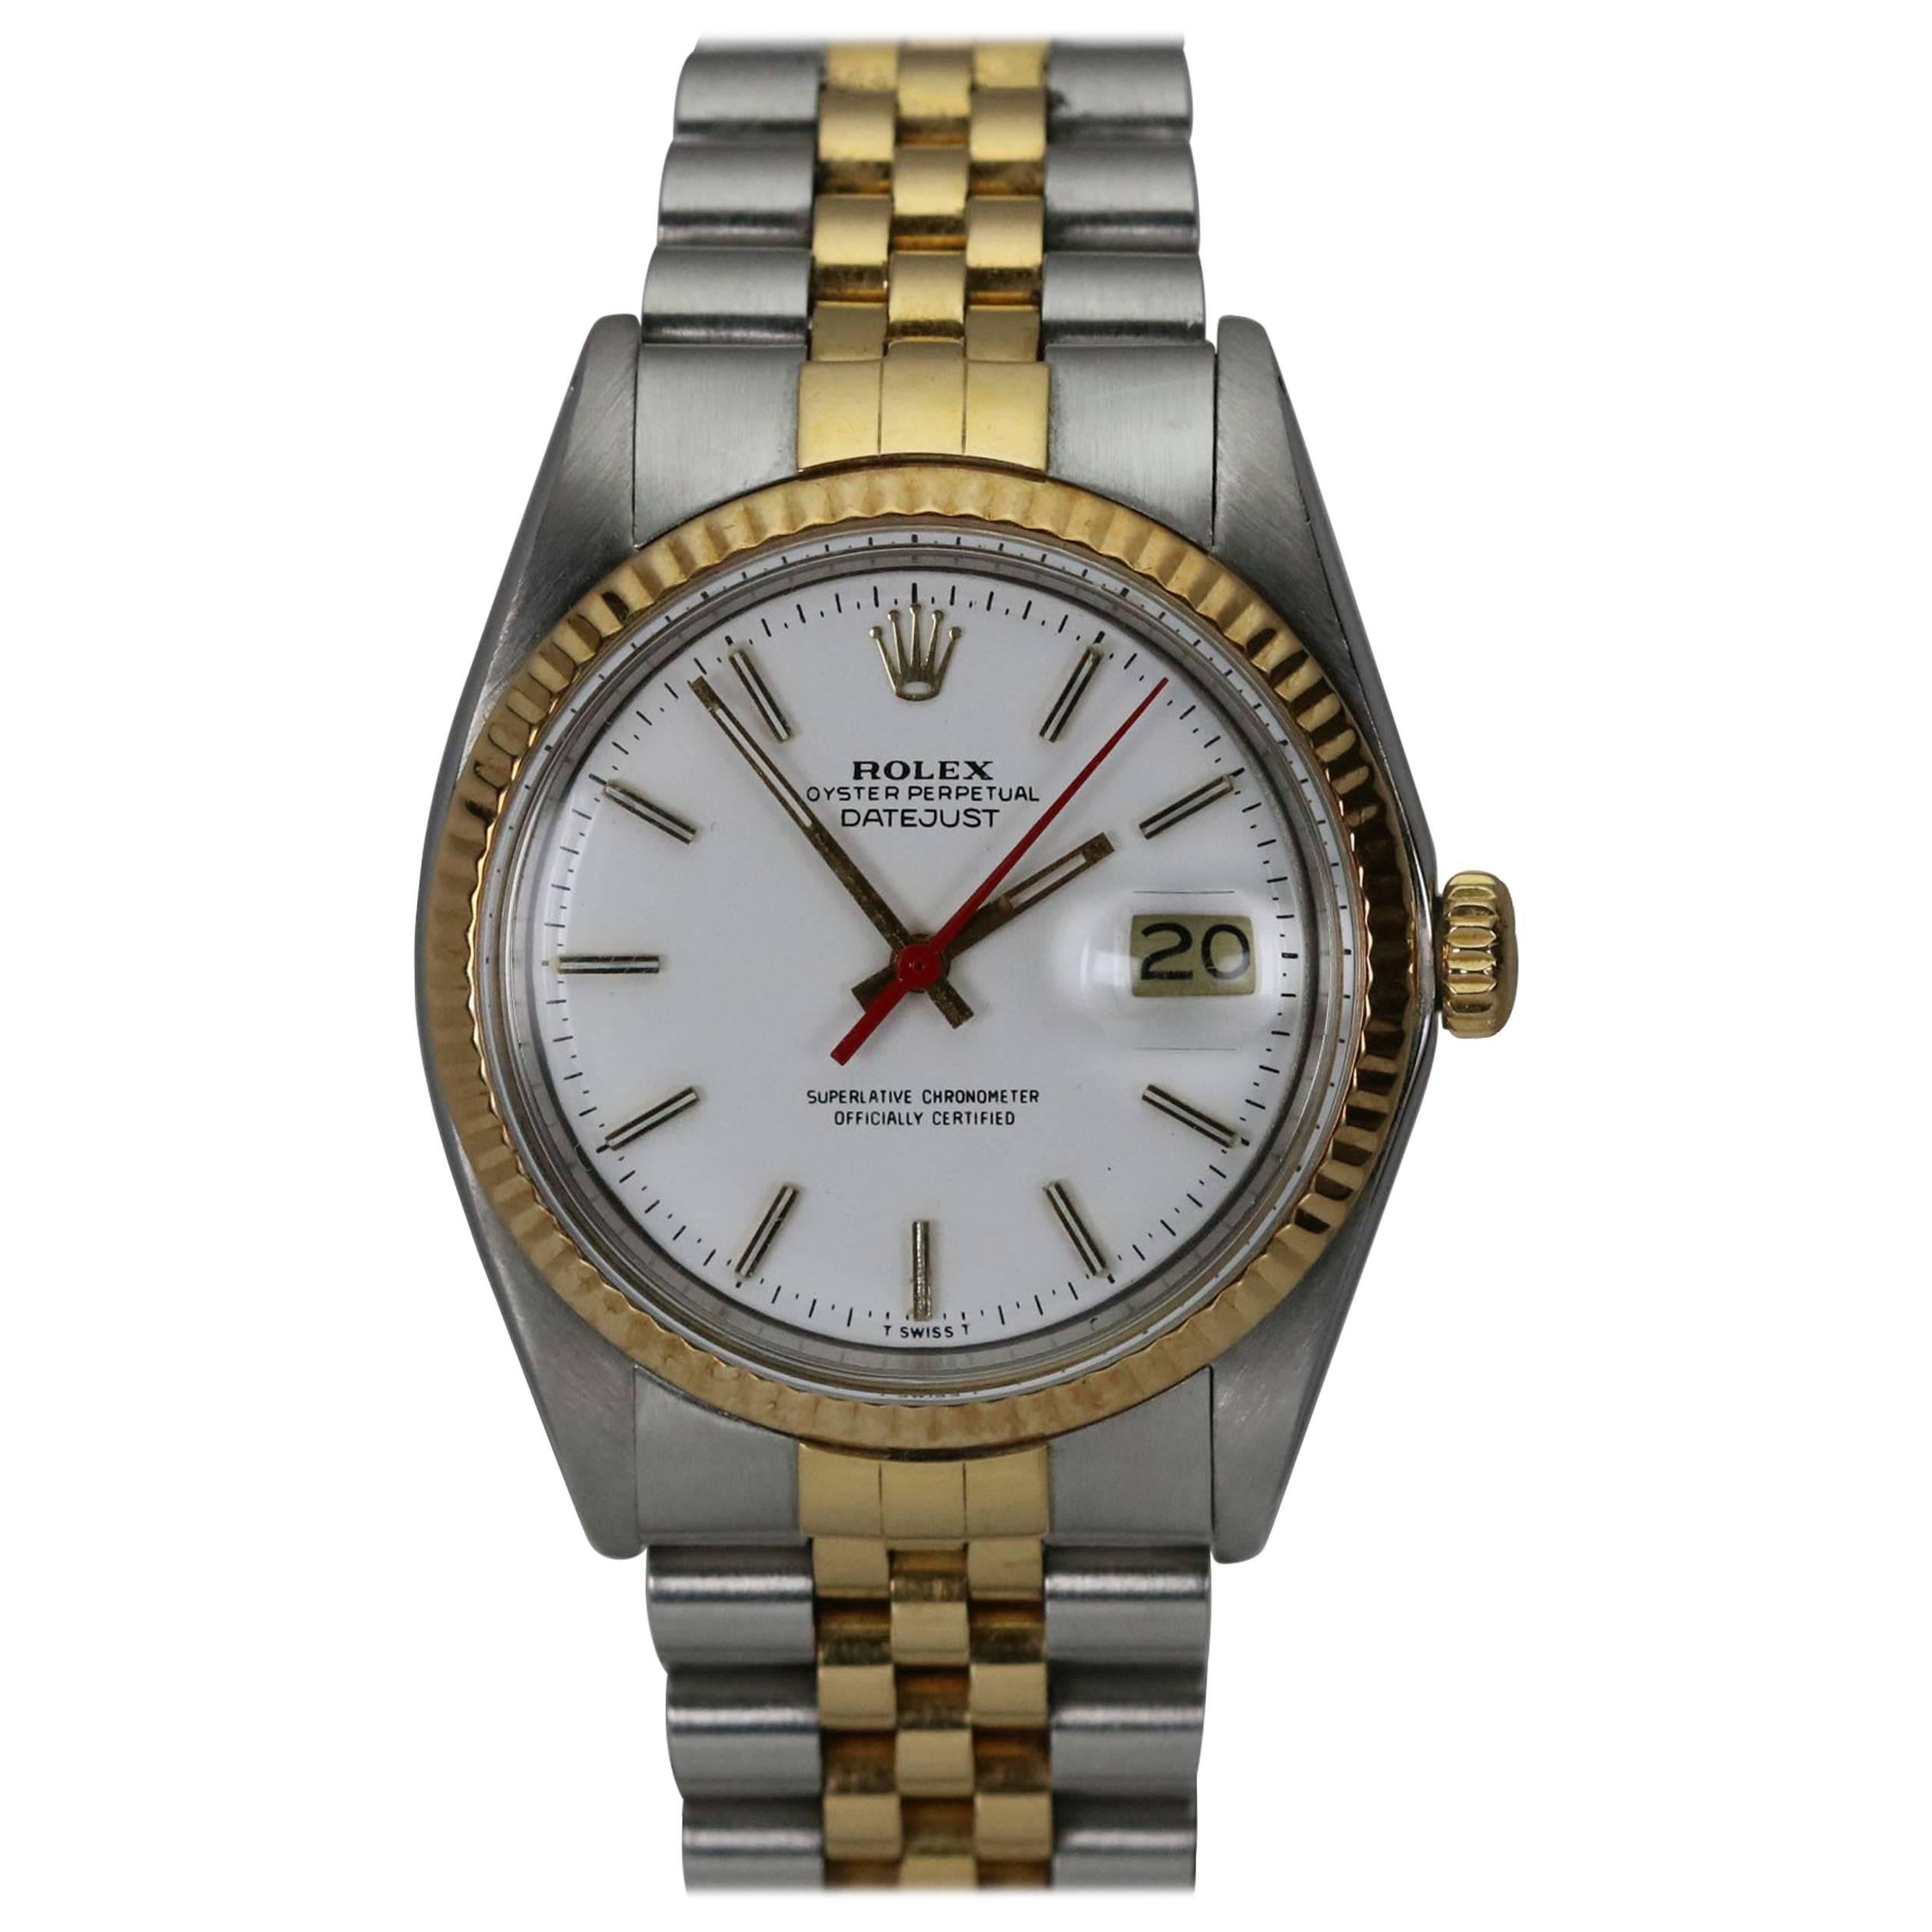 Rolex Yellow Gold Stainless Steel Datejust automatic wristwatch Ref 1601, c1977